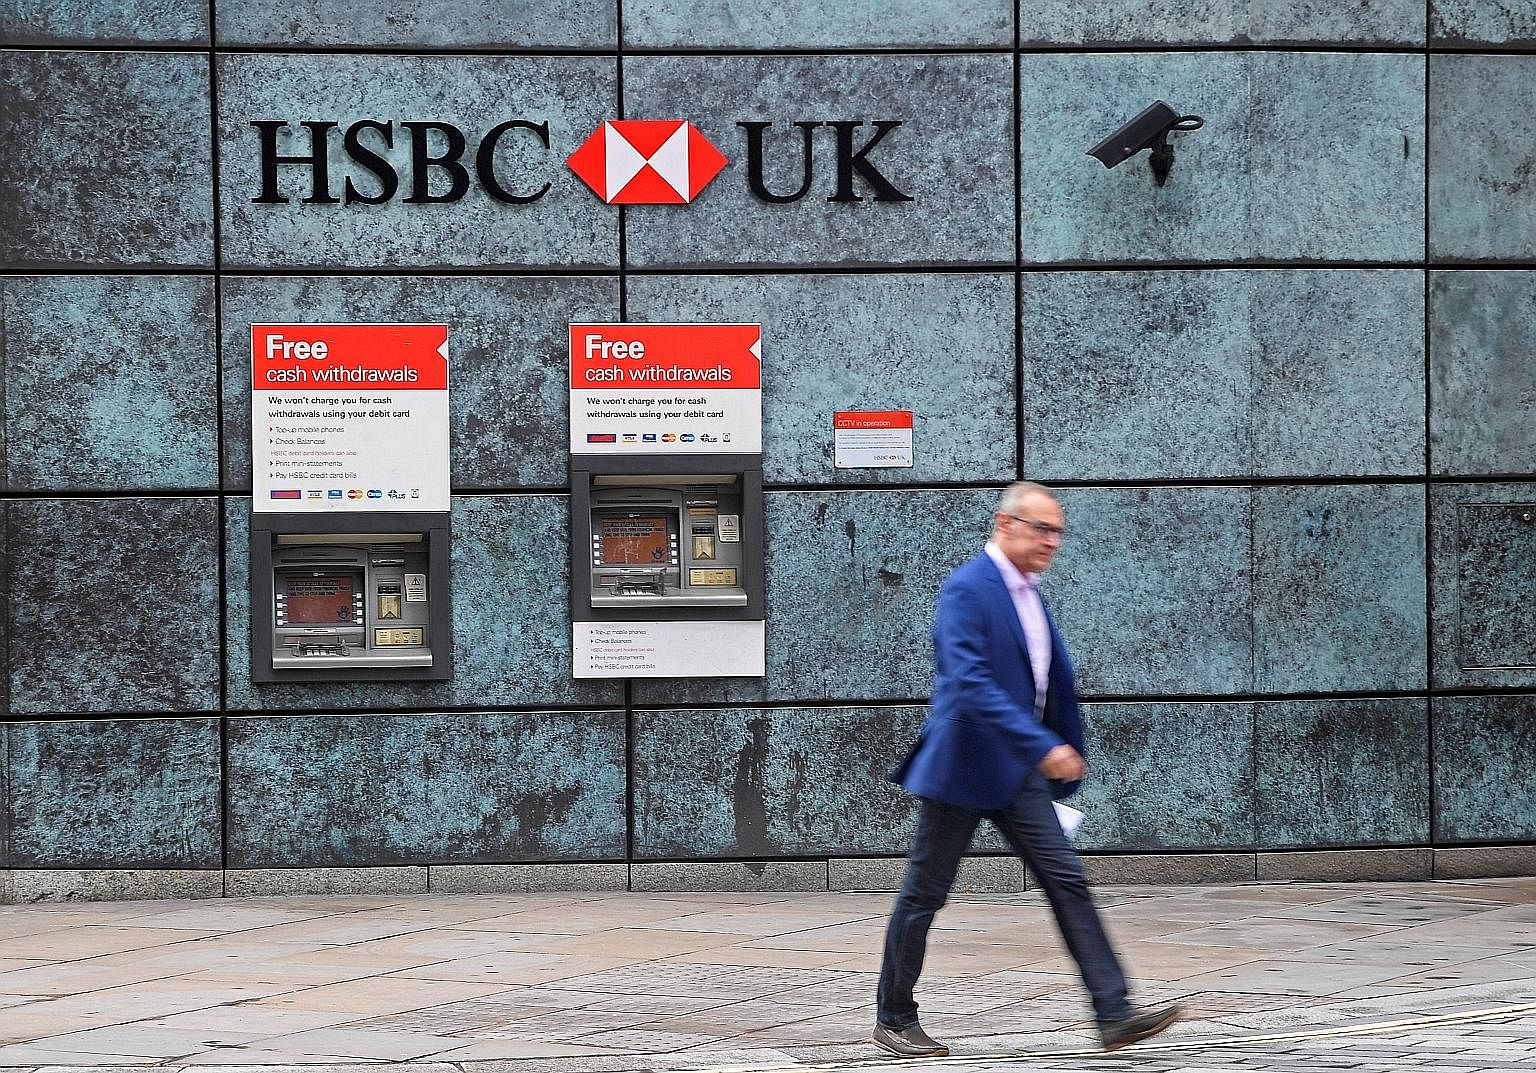 HSBC Holdings thwarted a US$500 million (S$691 million) central bank heist when a teller at a suburban branch became suspicious, declined a request to transfer US$2 million, and triggered a review, according to one account.